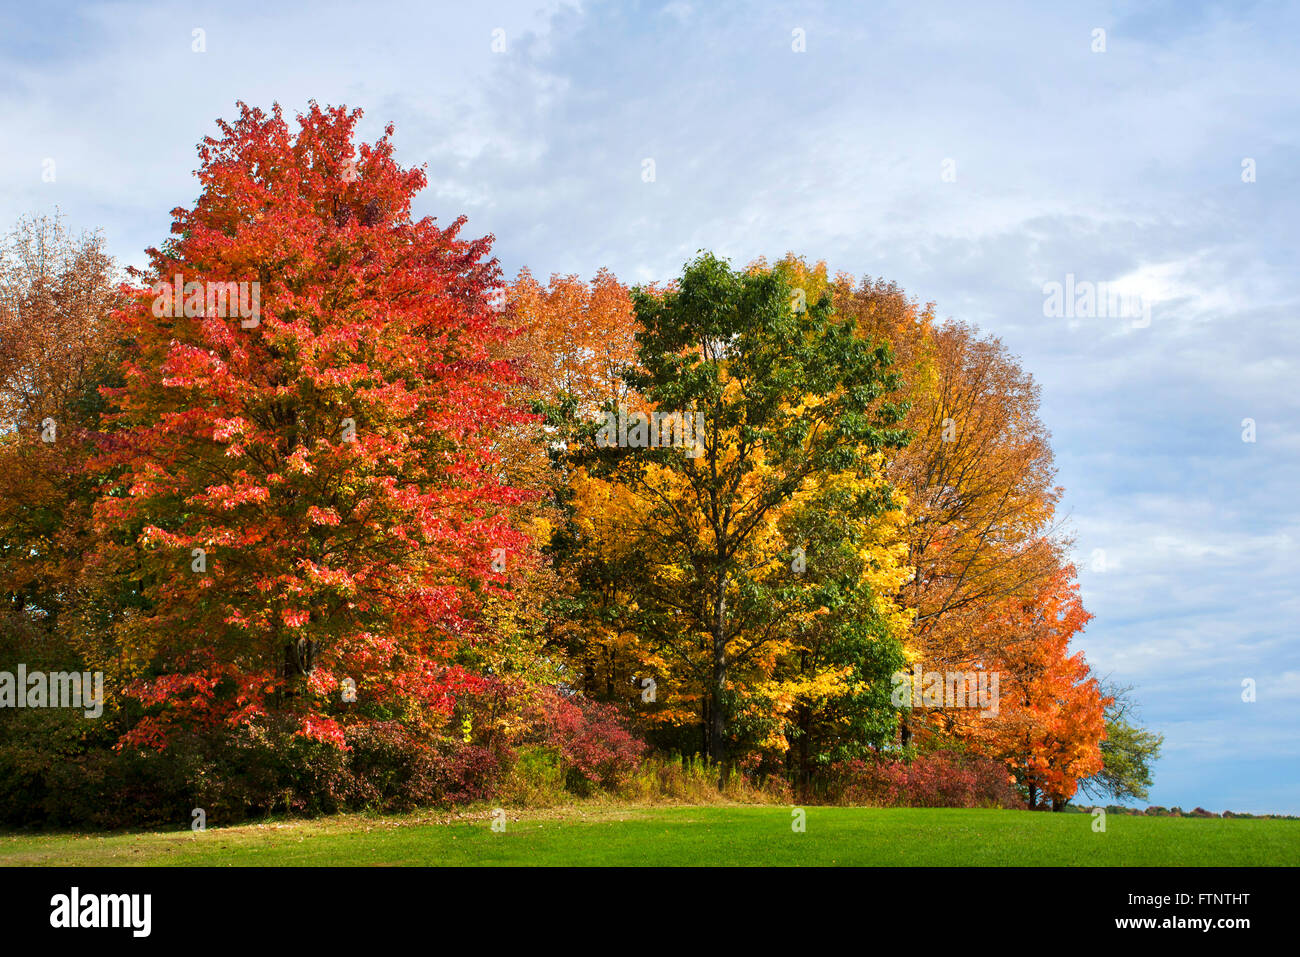 Fall trees scenic landscape of changing colors in Binghamton, Broome County upstate New York, North America USA. Stock Photo